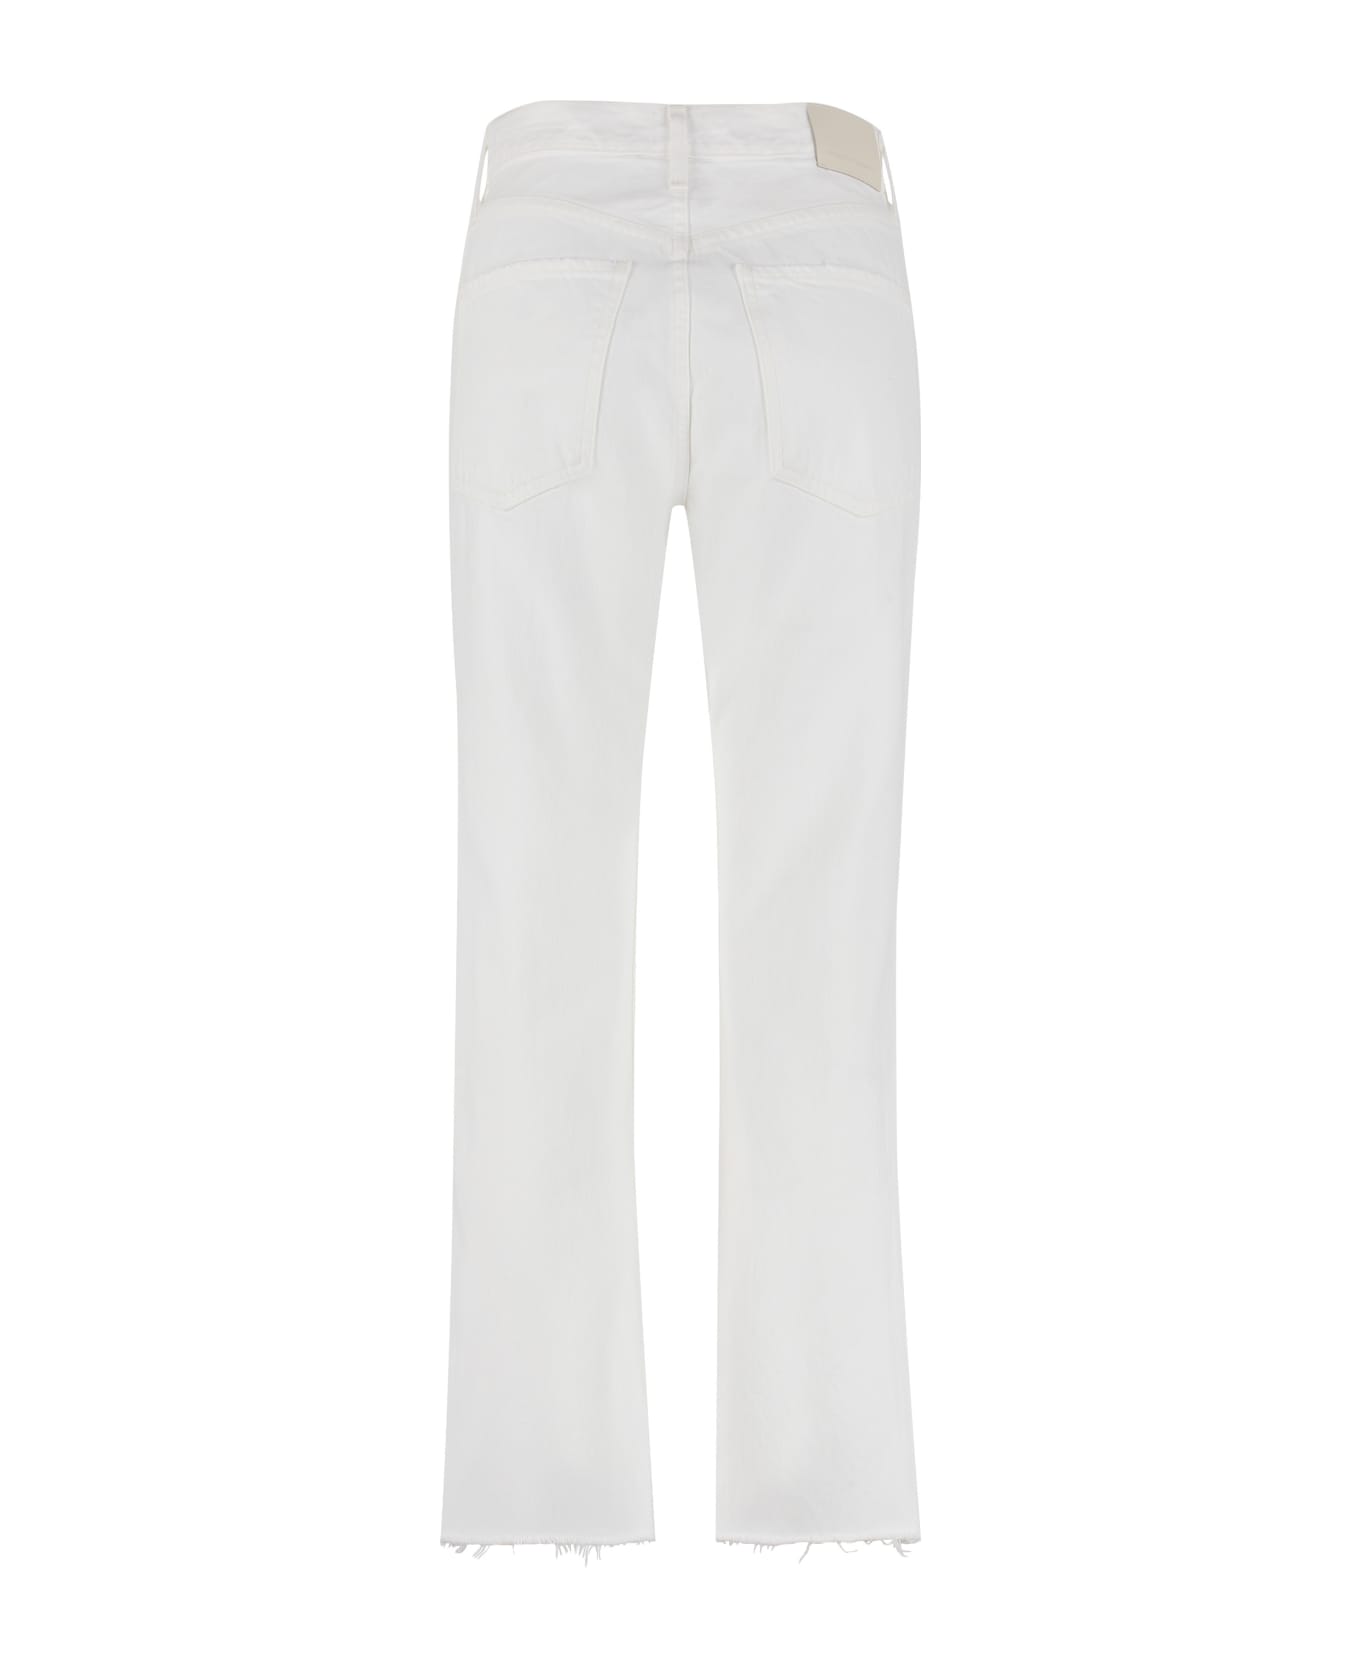 Citizens of Humanity Daphne Crop Stovepipe Jeans - White